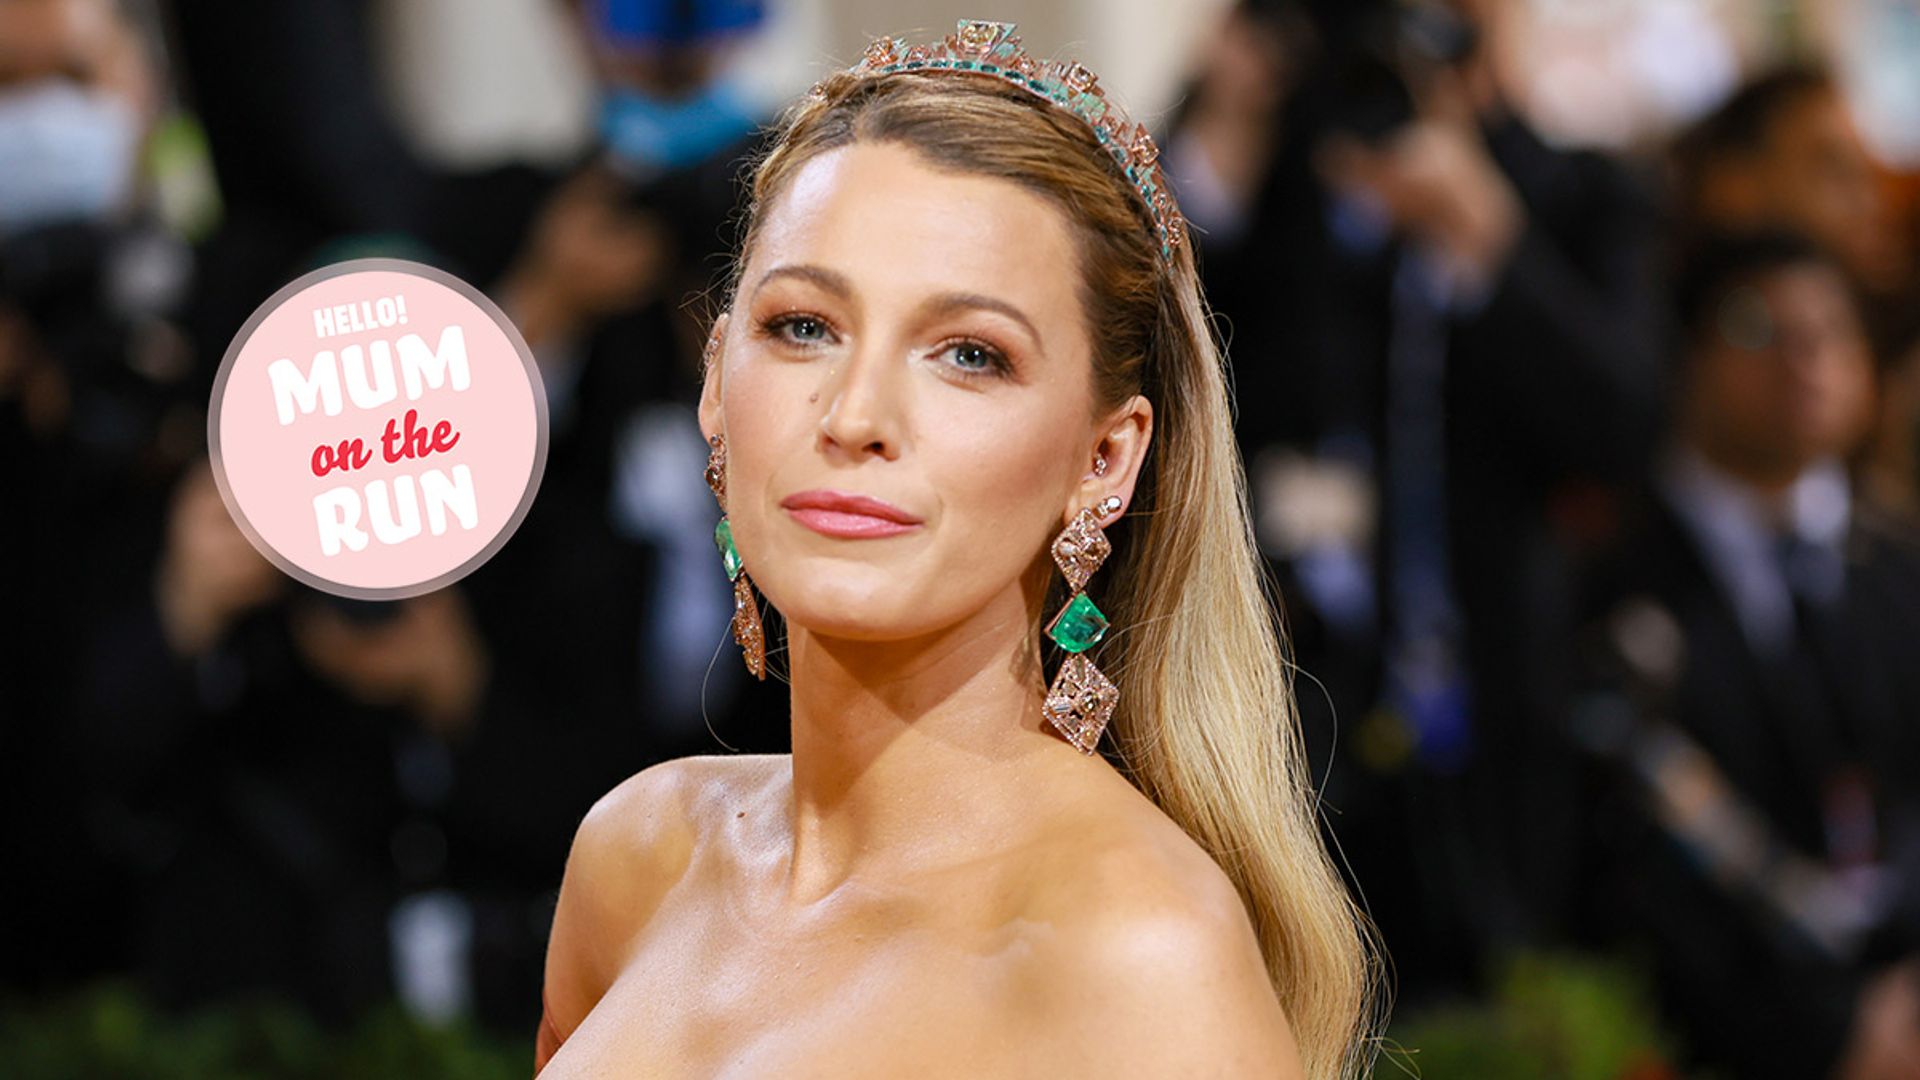 HELLO! Mum on the Run: I tried every single product Blake Lively used at the Met Gala